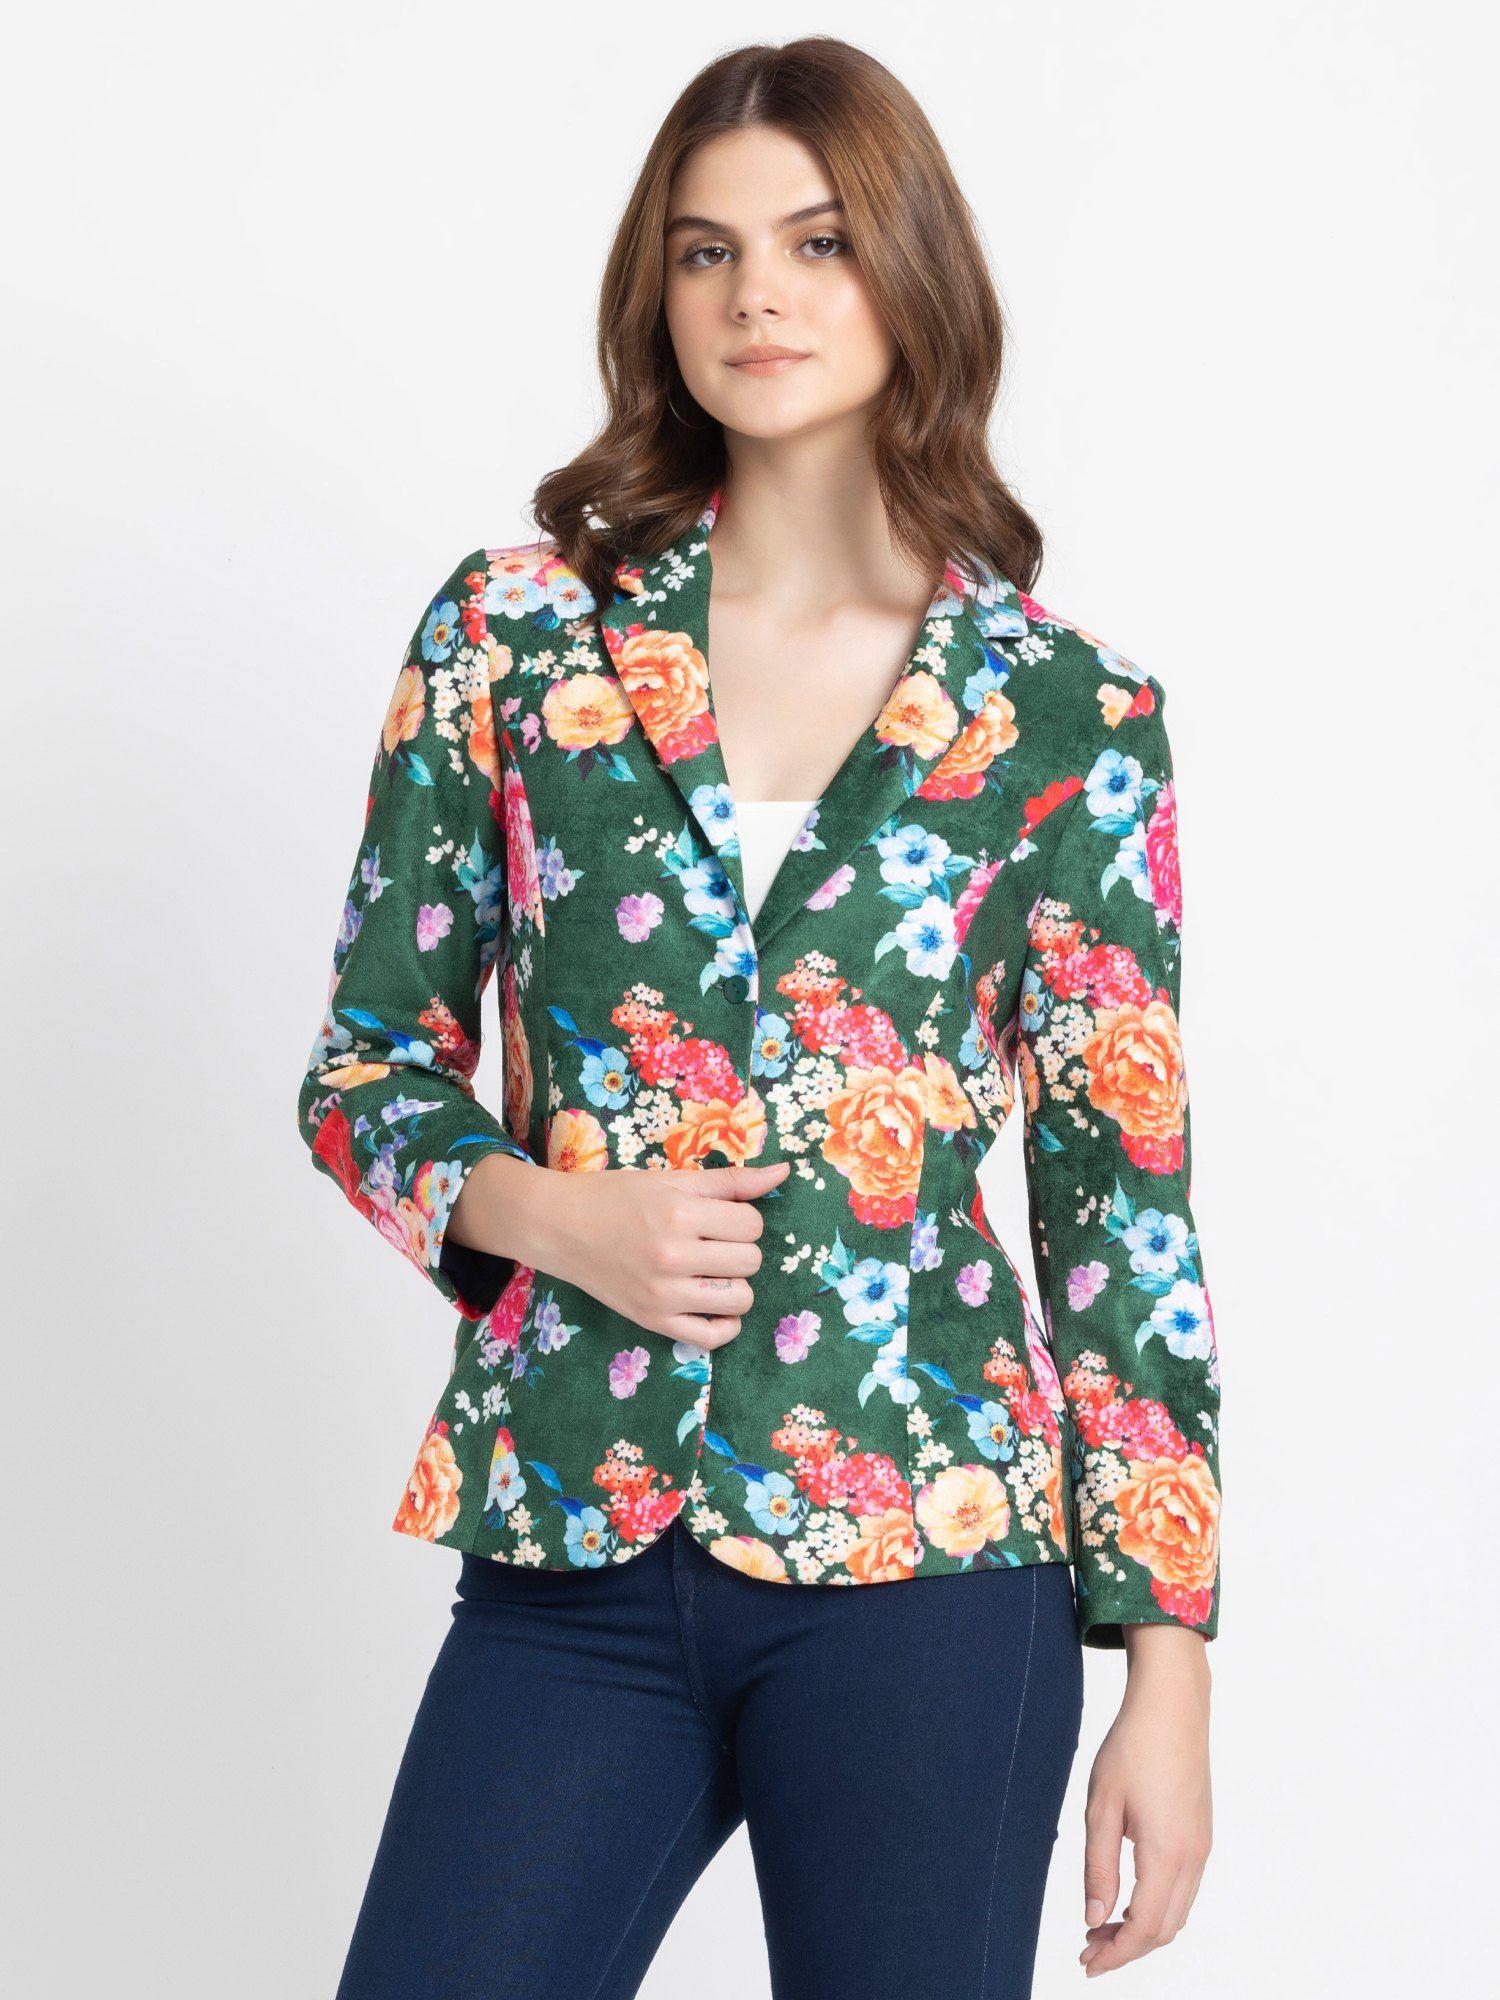 Notched Lapel Collar Green Floral Print Full Sleeves Casual Blazer for Women